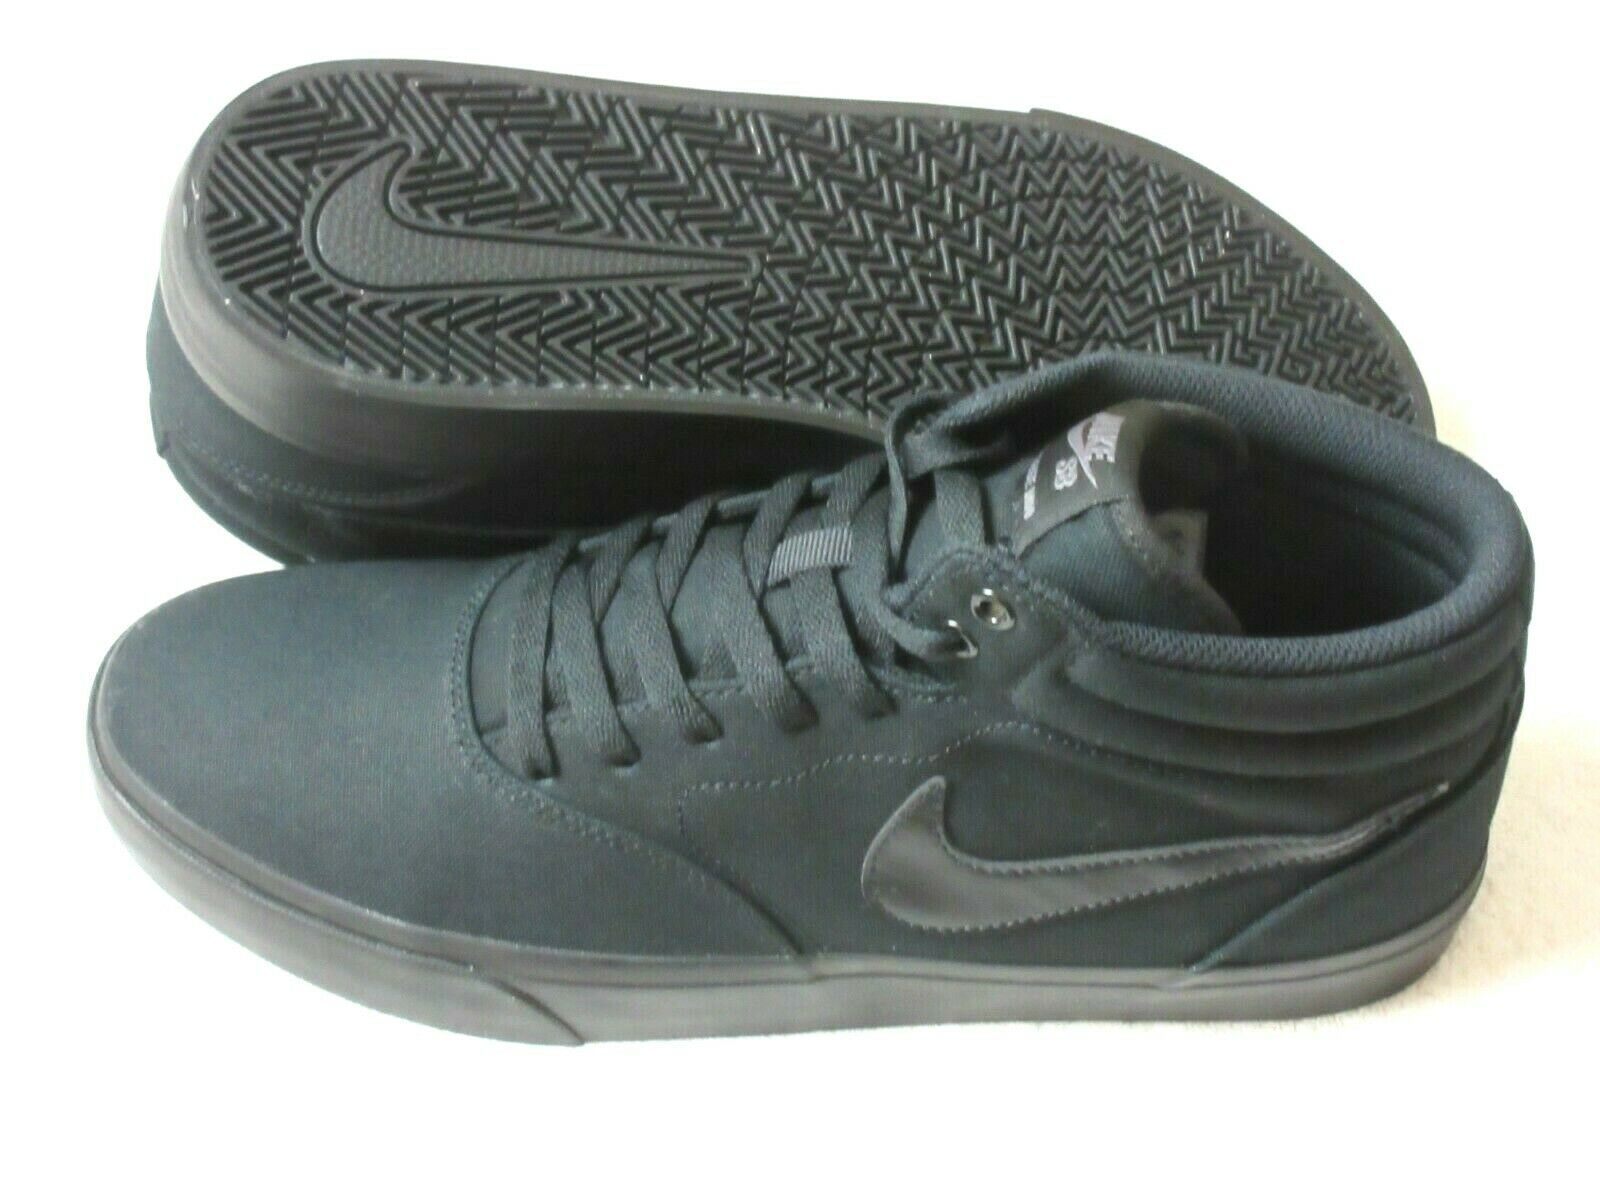 Nike SB Men's Charge Mid Top Canvas Skate Shoes Black Thunder Grey Size 11 NEW